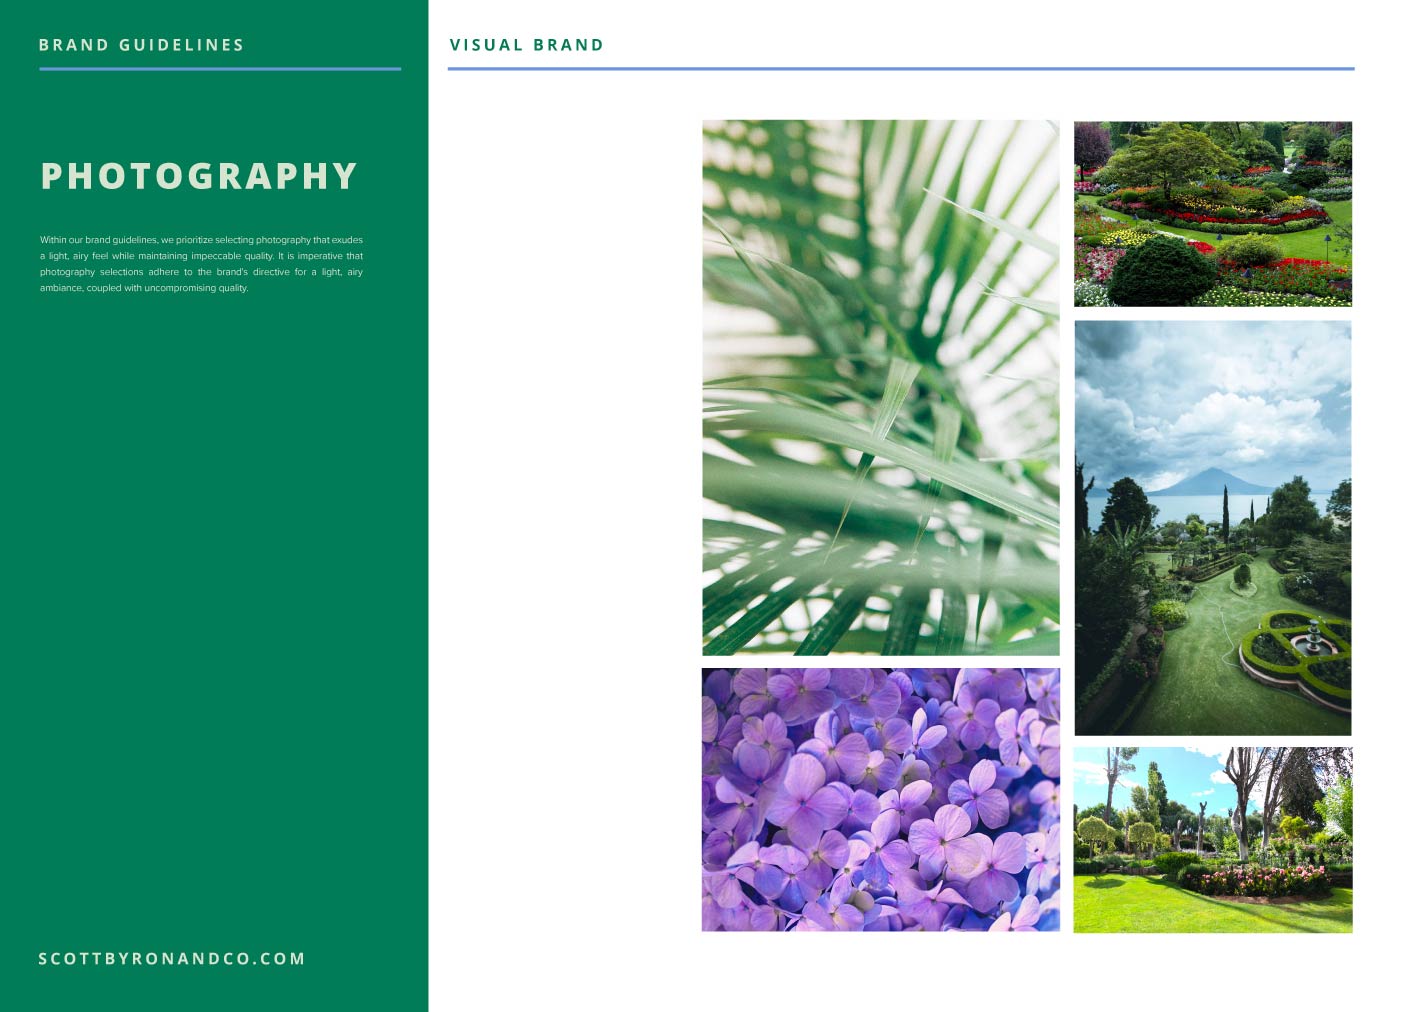 A spread of the brand guide bringing emphasis on "Photography".